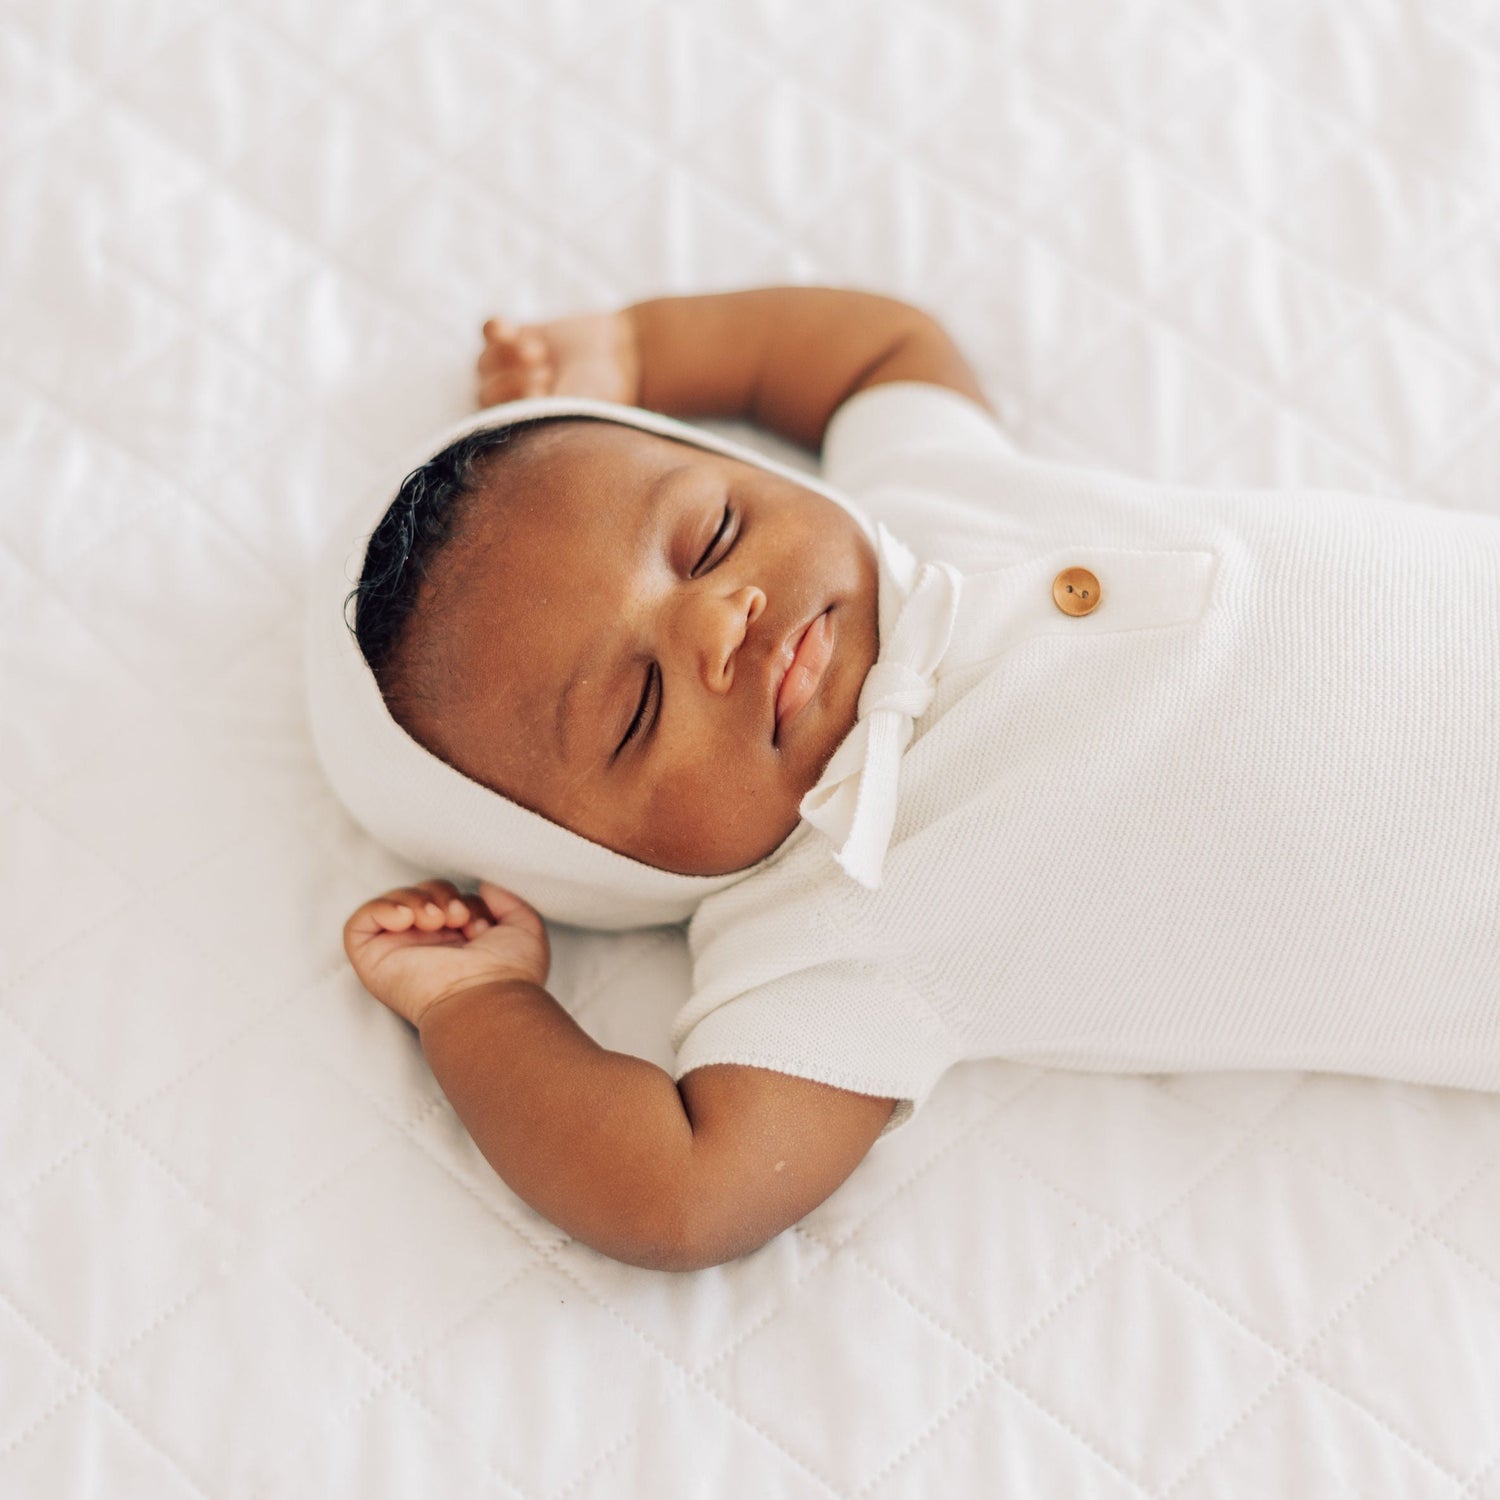 Baby laying on white comforter in white bonnet and white outfit with brown buttons.